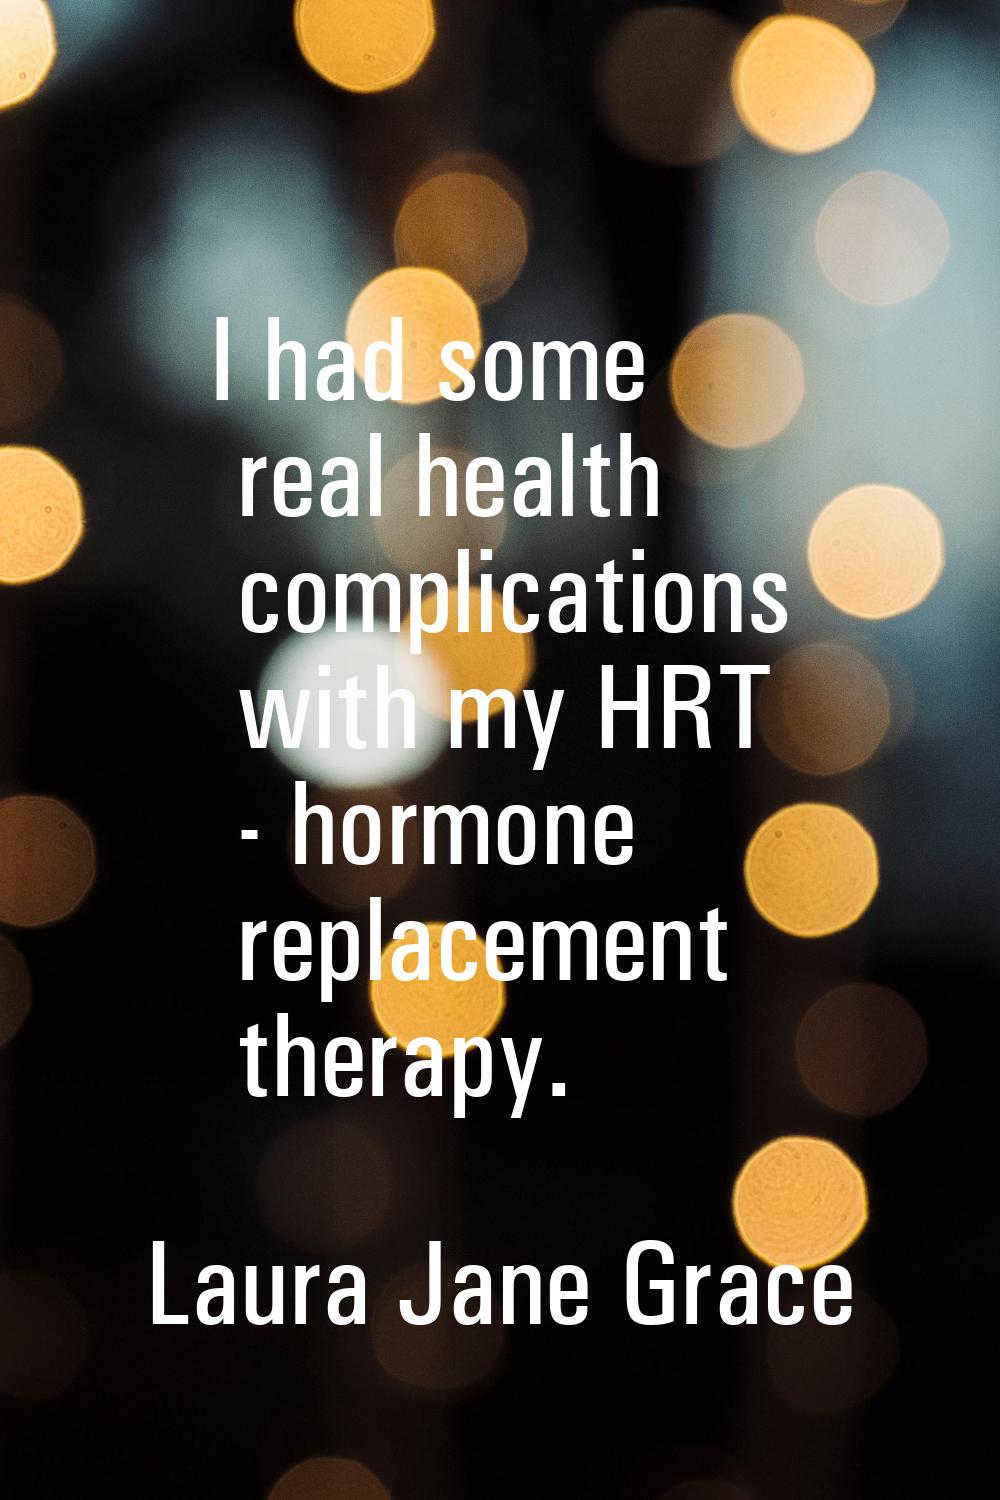 I had some real health complications with my HRT - hormone replacement therapy.